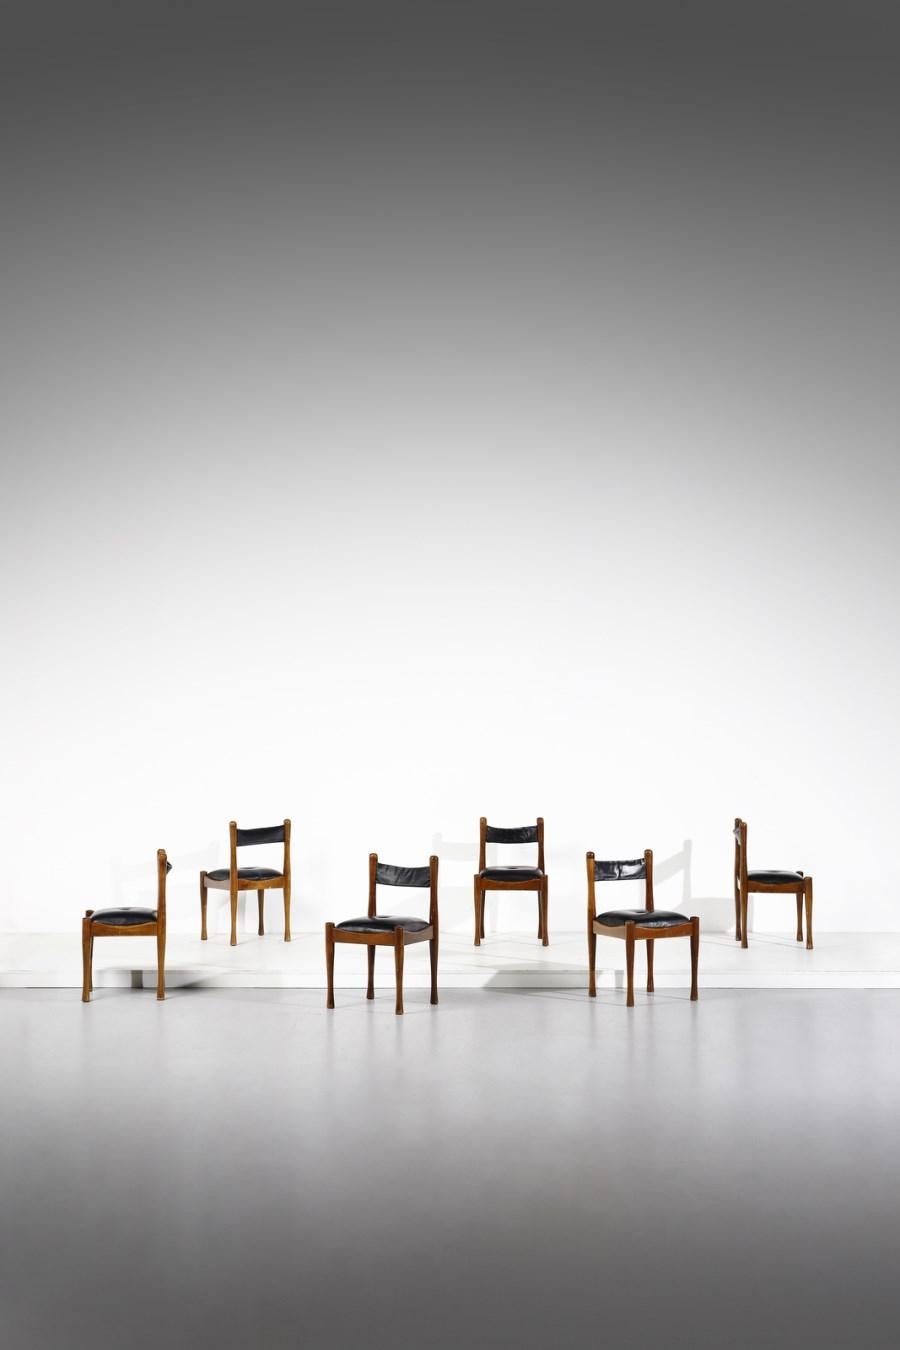 Silvio Coppola for Bernini, set of 6 dining chairs, stained wood, black leather, Italy, 1960s

These chairs were created by Silvio Coppola for Bernini in the 1960s. They have a dark frame and black leather seats, with leather backrests. The frame's